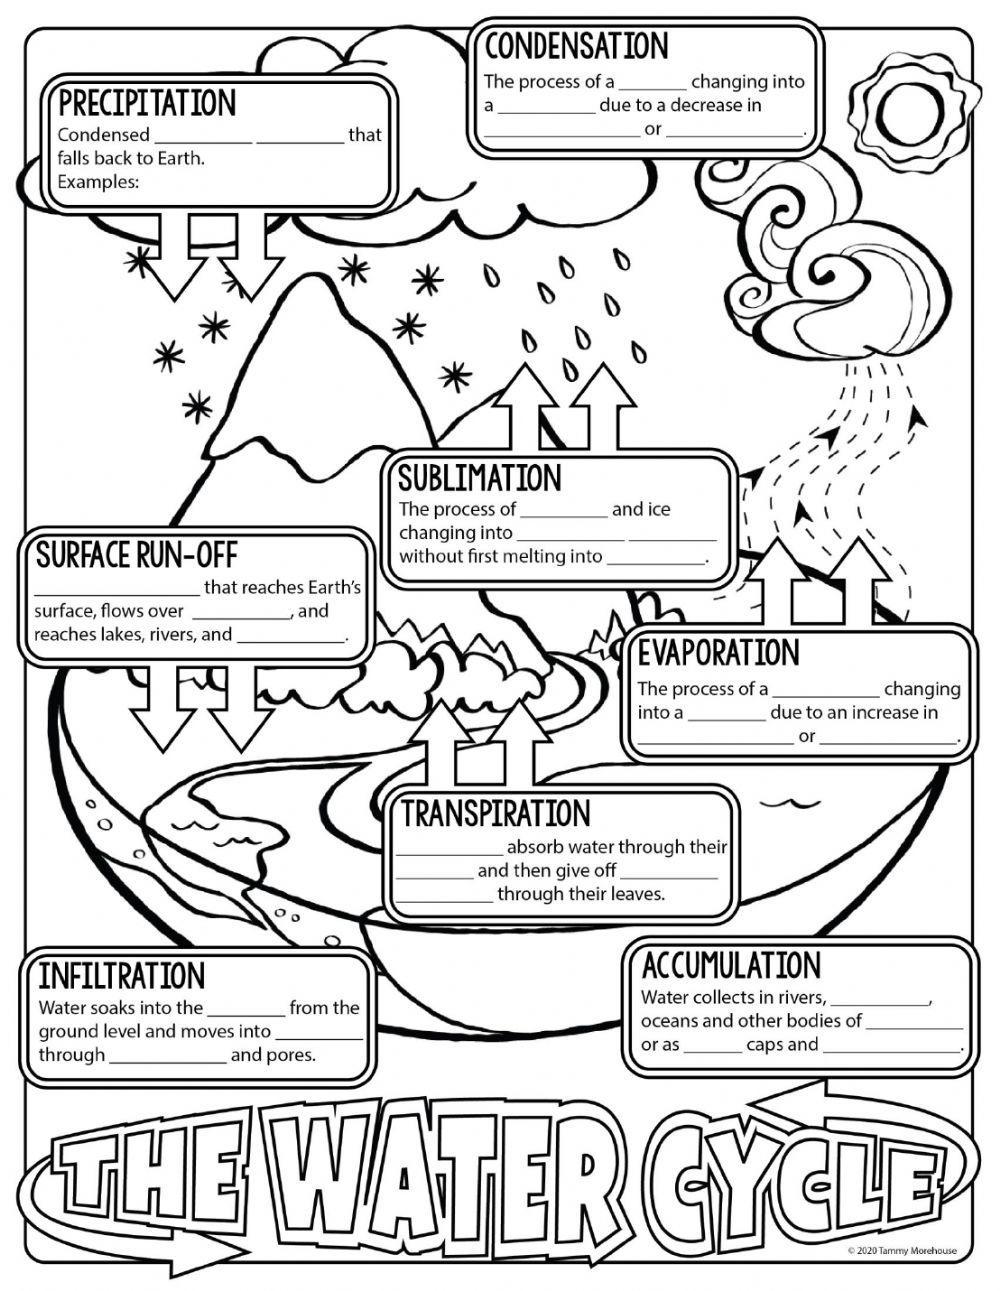 The Water Cycle Notes